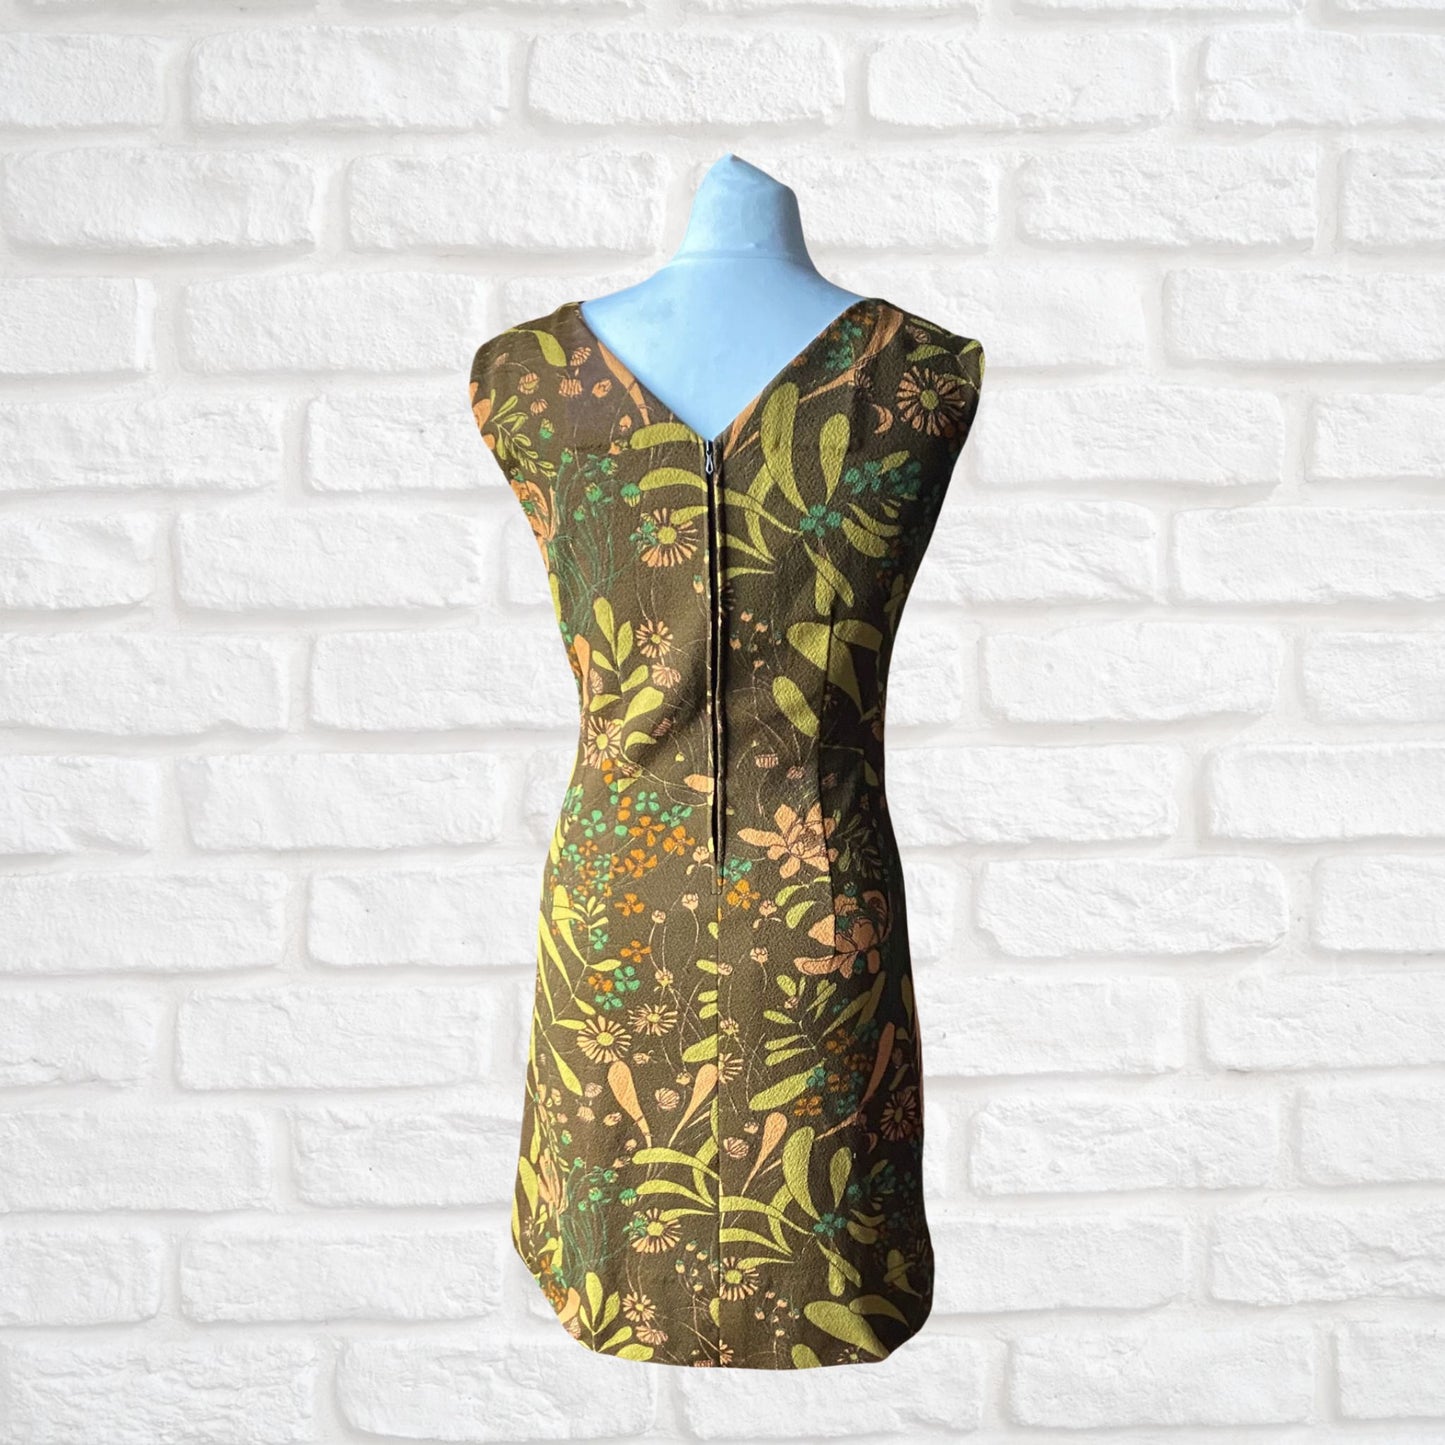 Vintage 60s Green, Peach and Brown Floral Print Mini Dress. Approx UK size 8-10